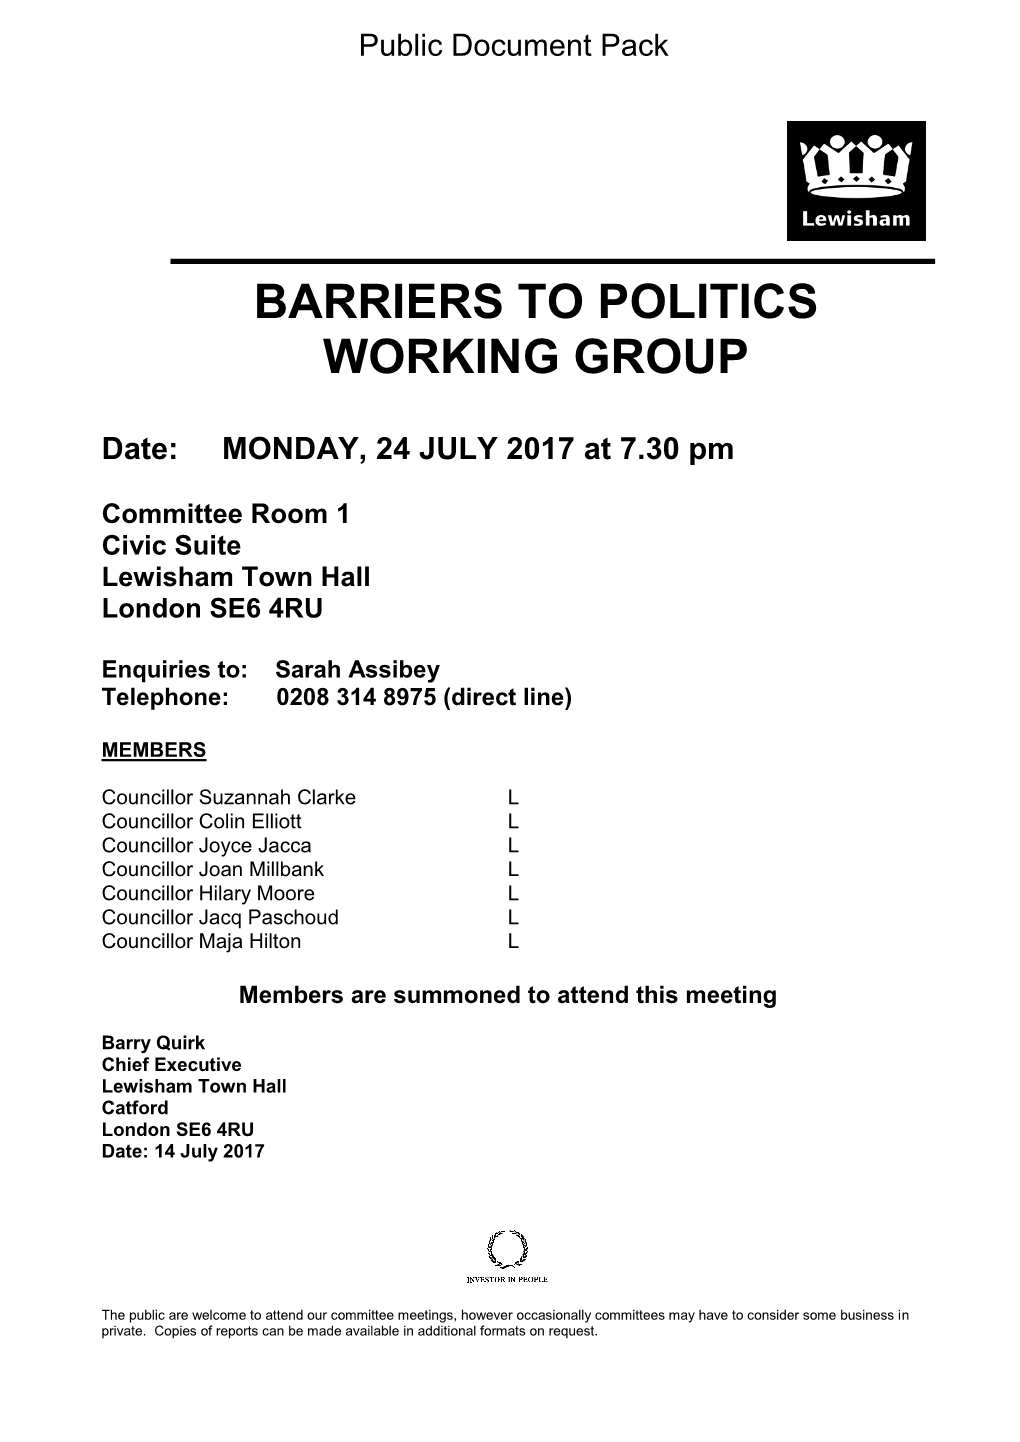 (Public Pack)Agenda Document for Barriers to Politics Working Group